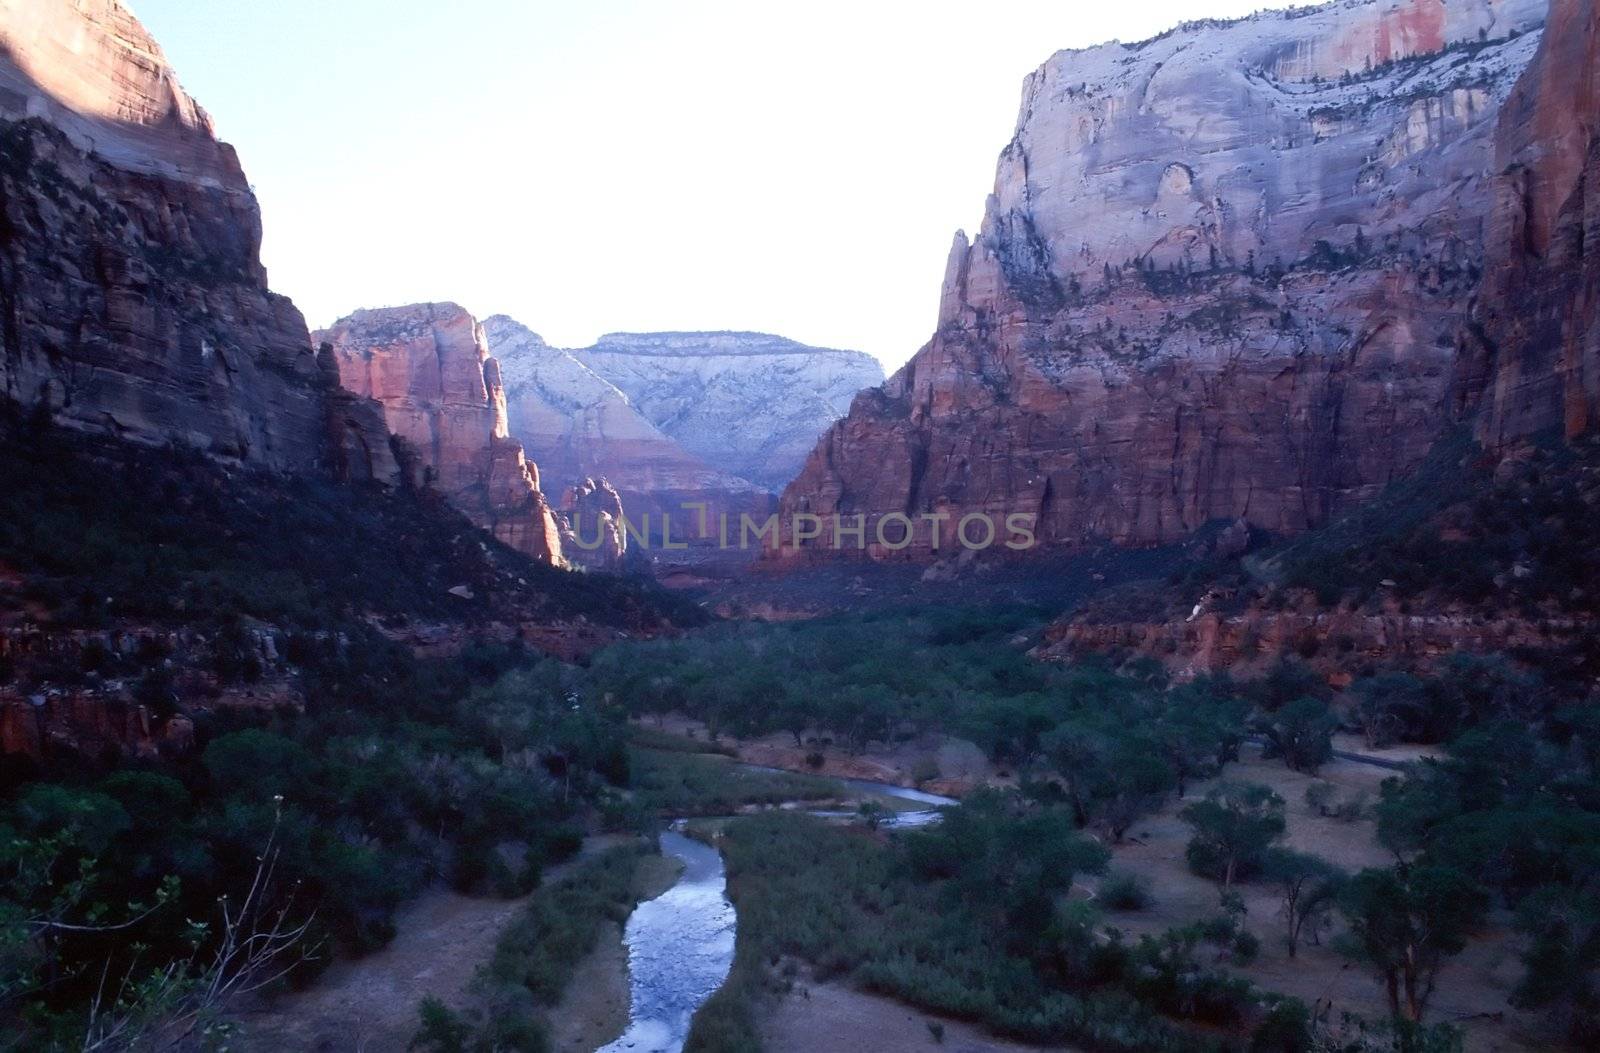 Zion National Park is a United States National Park located in the Southwestern United States, near Springdale, Utah.